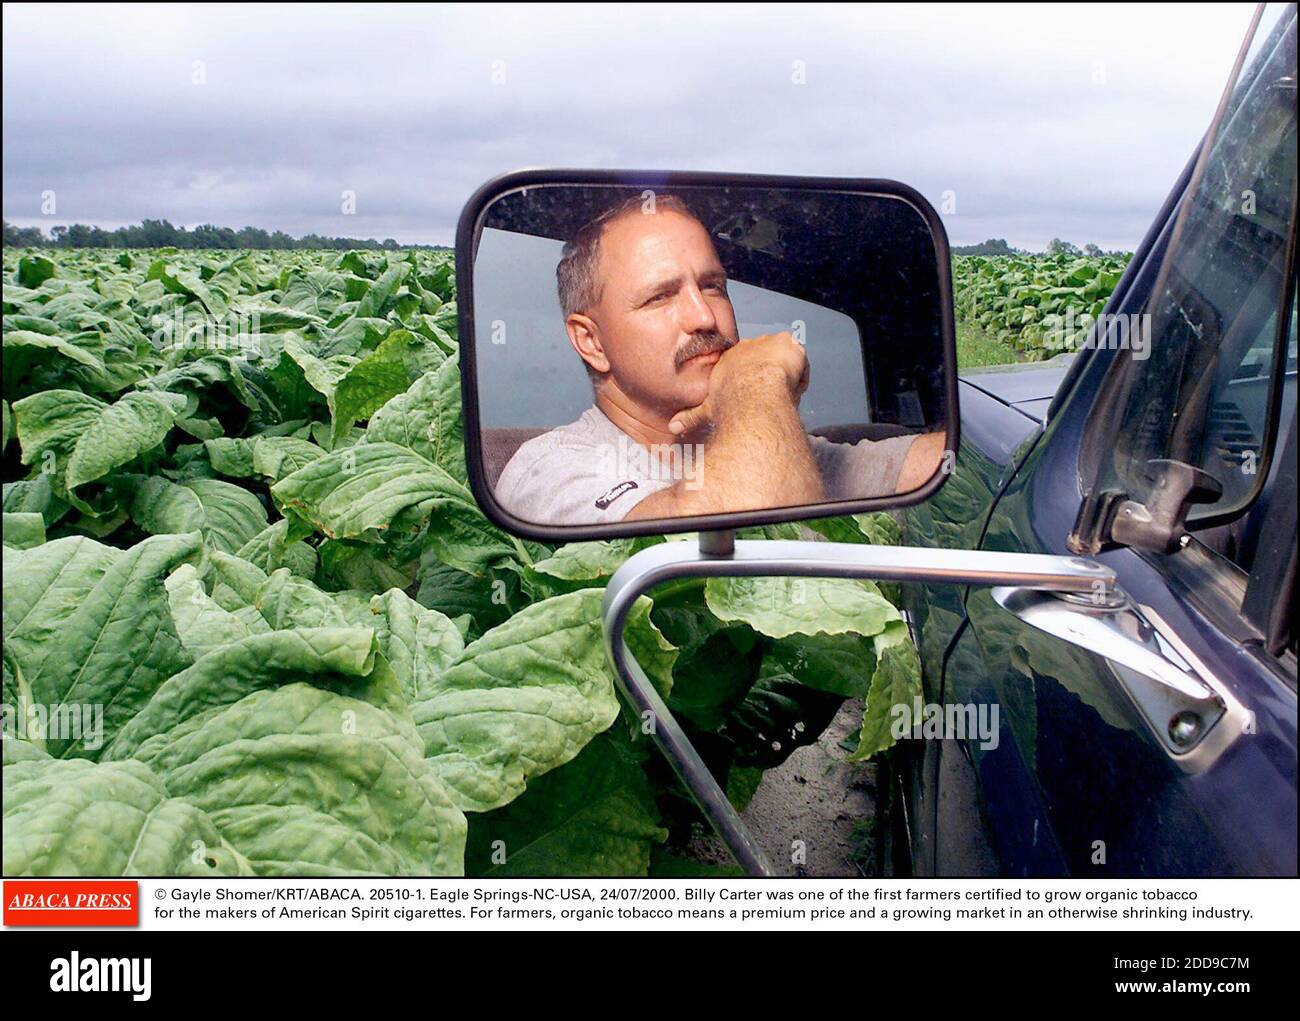 NO FILM, NO VIDEO, NO TV, NO DOCUMENTARY - © Gayle Shomer/KRT/ABACA. 20510-1. Eagle Springs-NC-USA, 24/07/2000. Billy Carter was one of the first farmers certified to grow organic tobacco for the makers of American Spirit cigarettes. For farmers, organic tobacco means a premium price and a growing Stock Photo